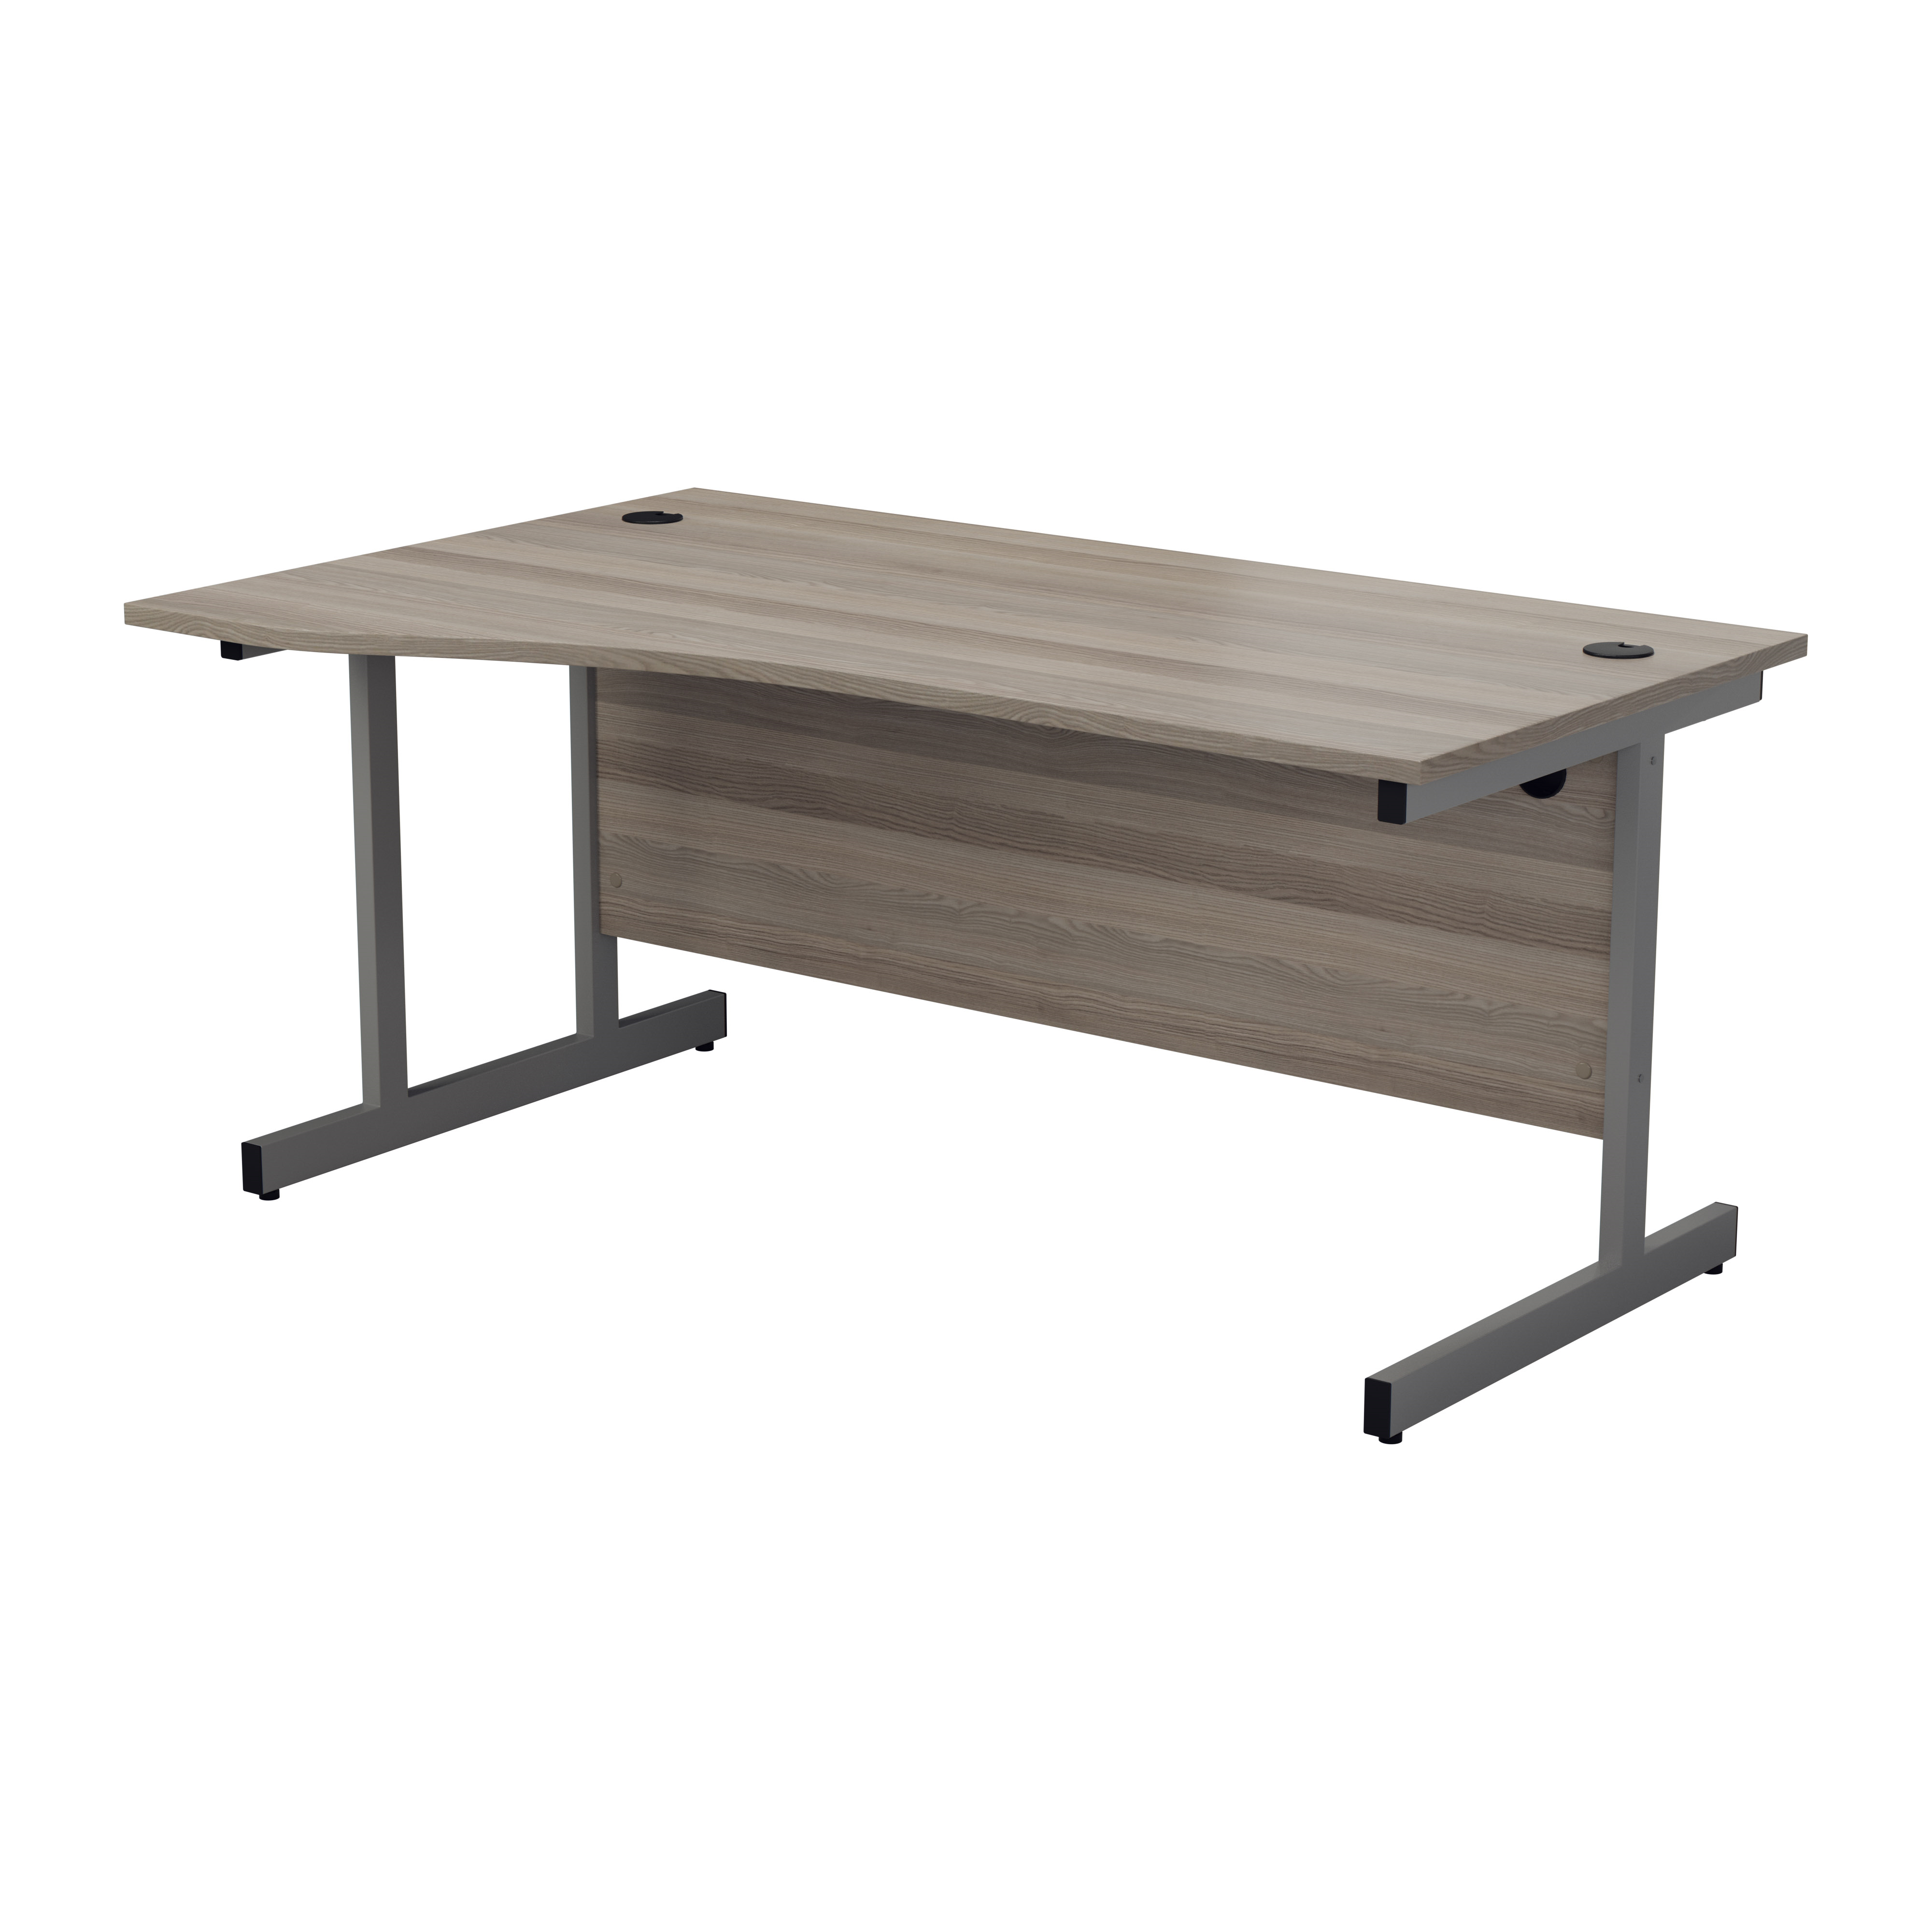 One Cantilever 1600 LH Wave Cantilever Workstation - Grey Oak Top Silver Legs